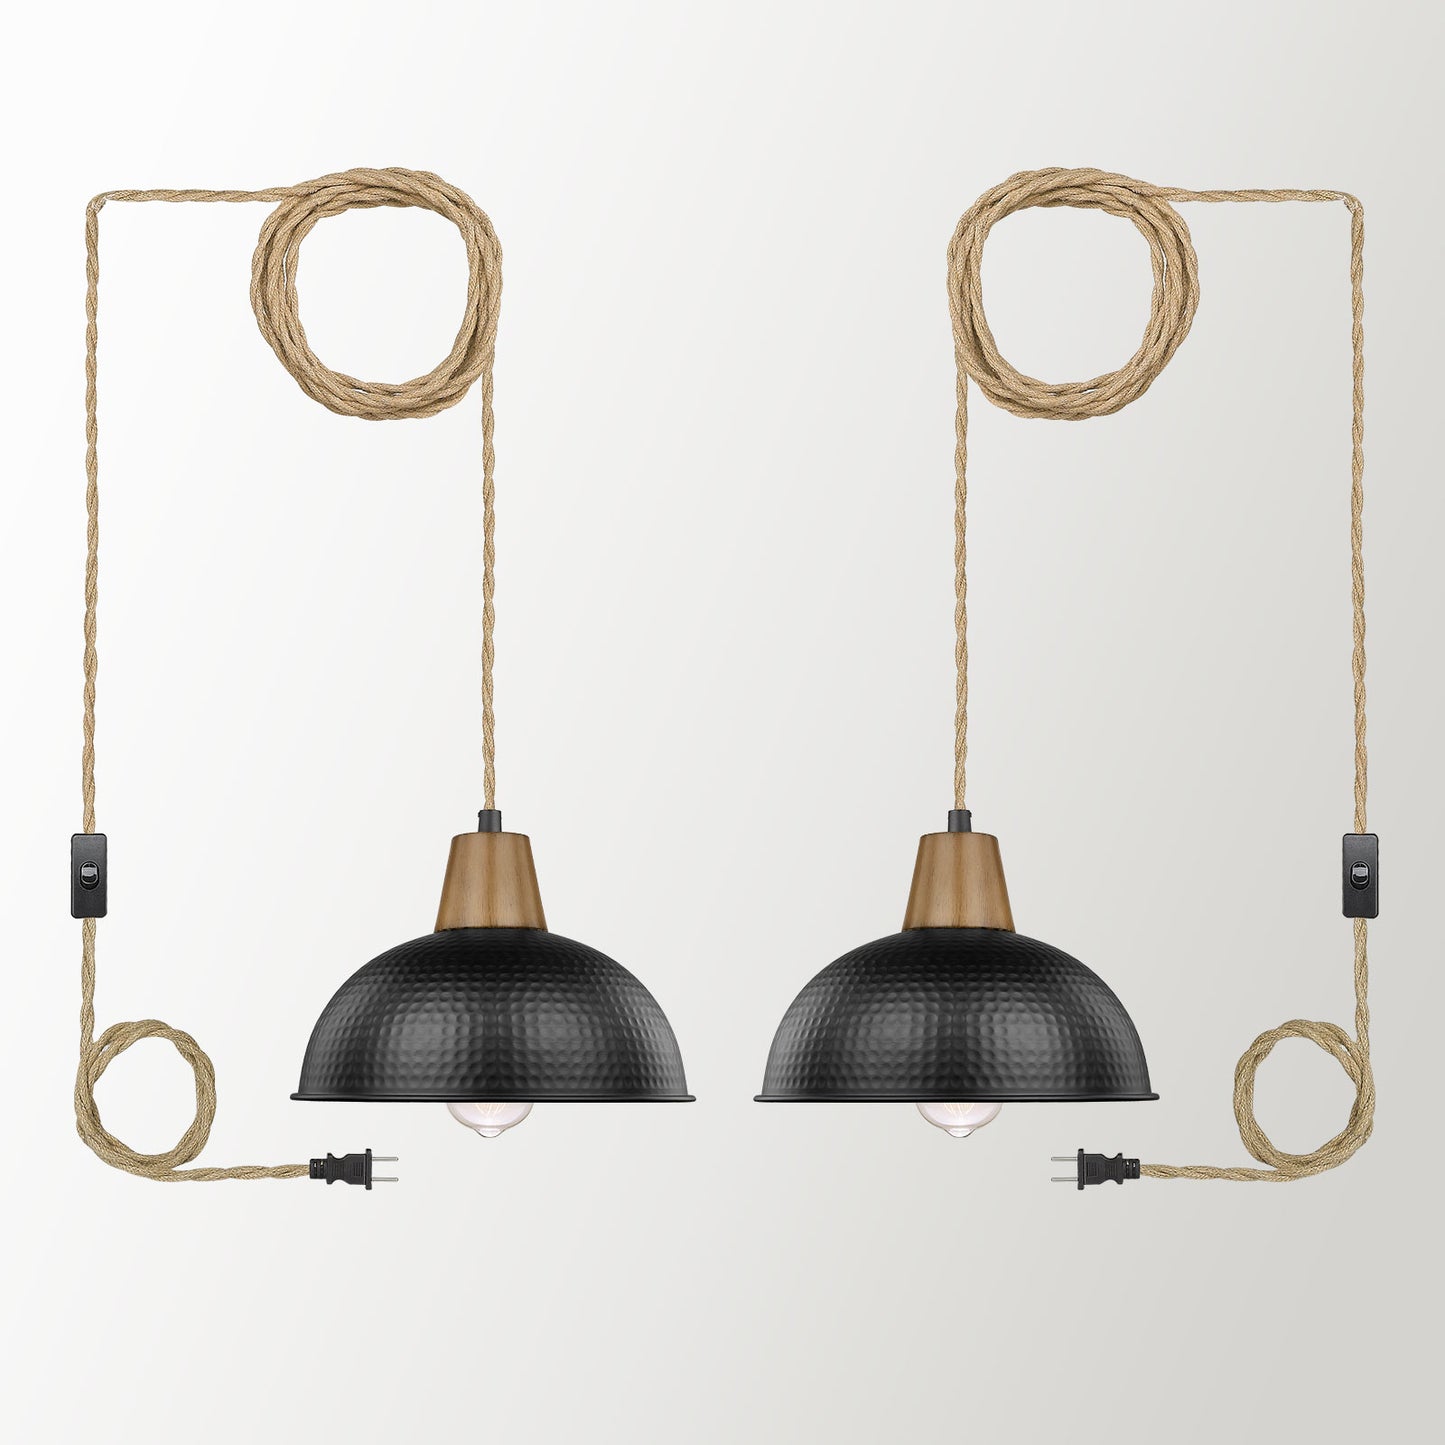 
                  
                    Emliviar 2 Pack Pendant Lights with Plug in Cord, Modern Hanging Light Fixture with Dome Metal Shade for Kitchen Bedroom, Black Finish, GE268MIL-2 BK+WD
                  
                